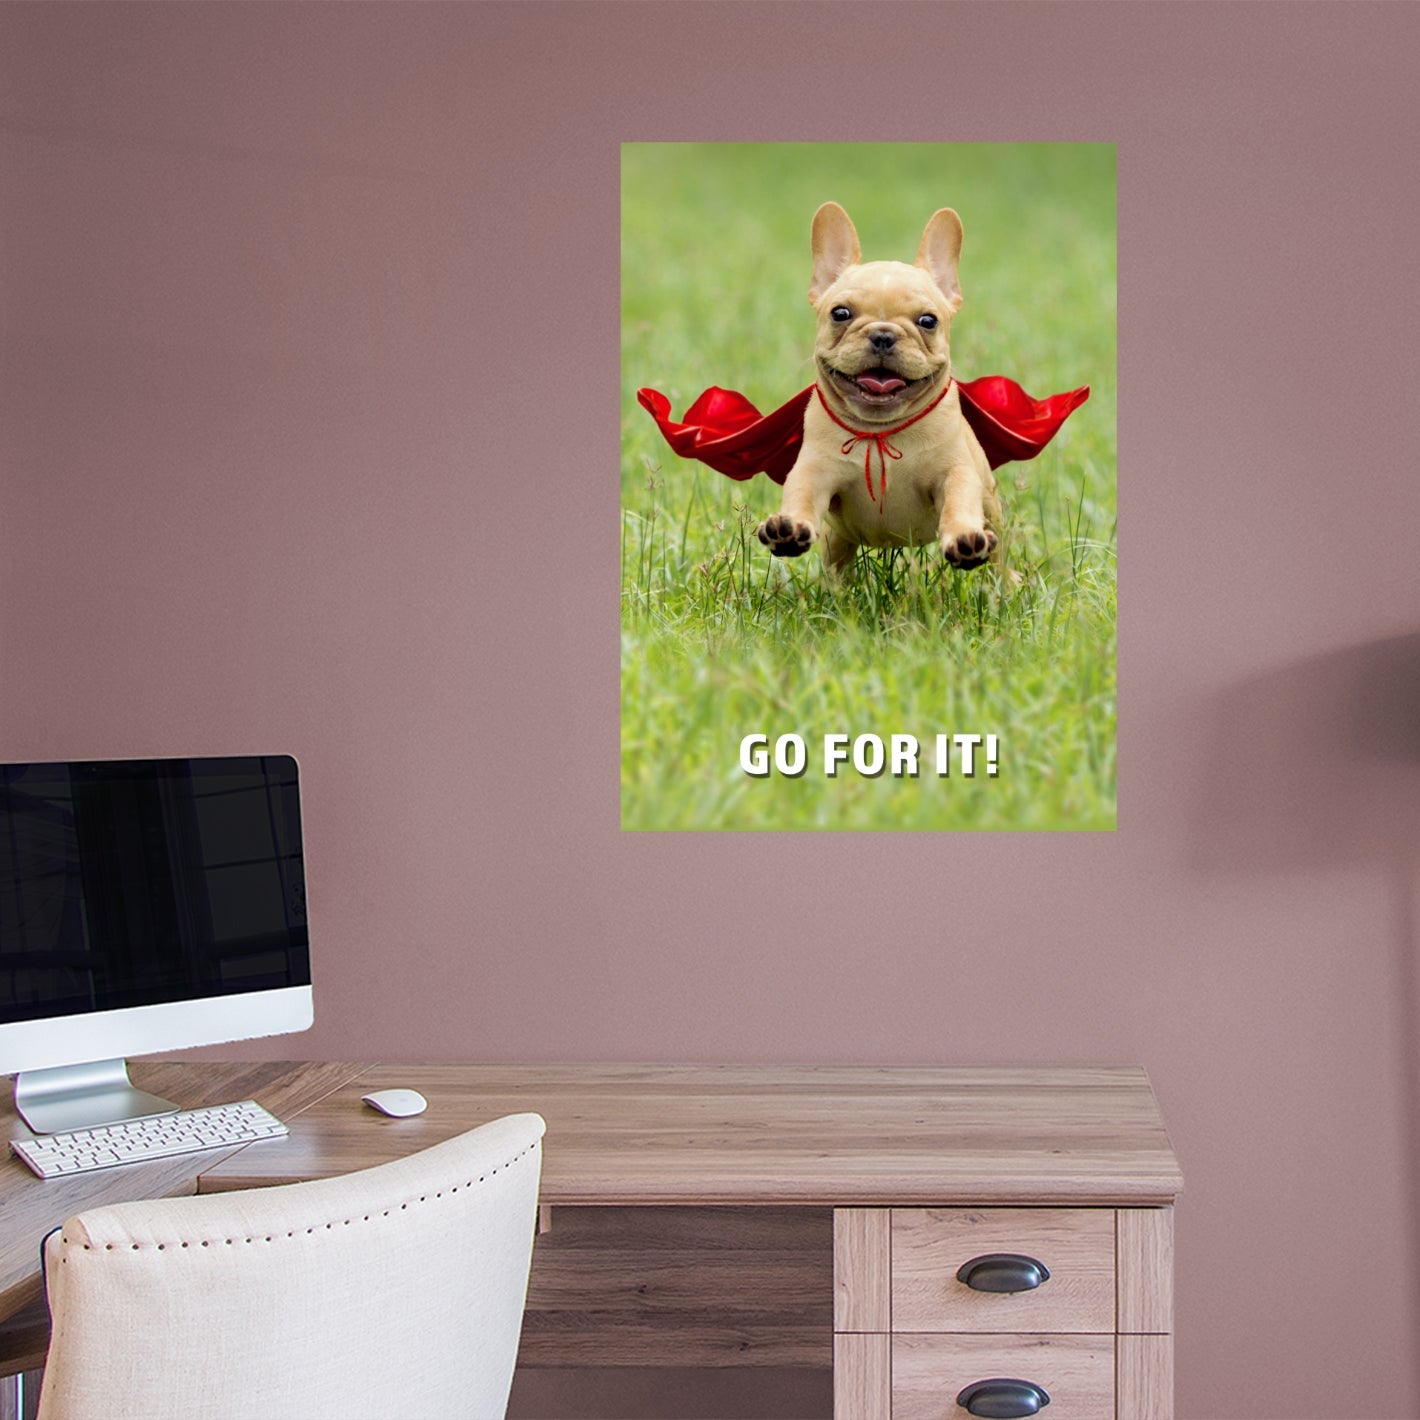 Avanti Press: Go For It Mural - Removable Adhesive Decal